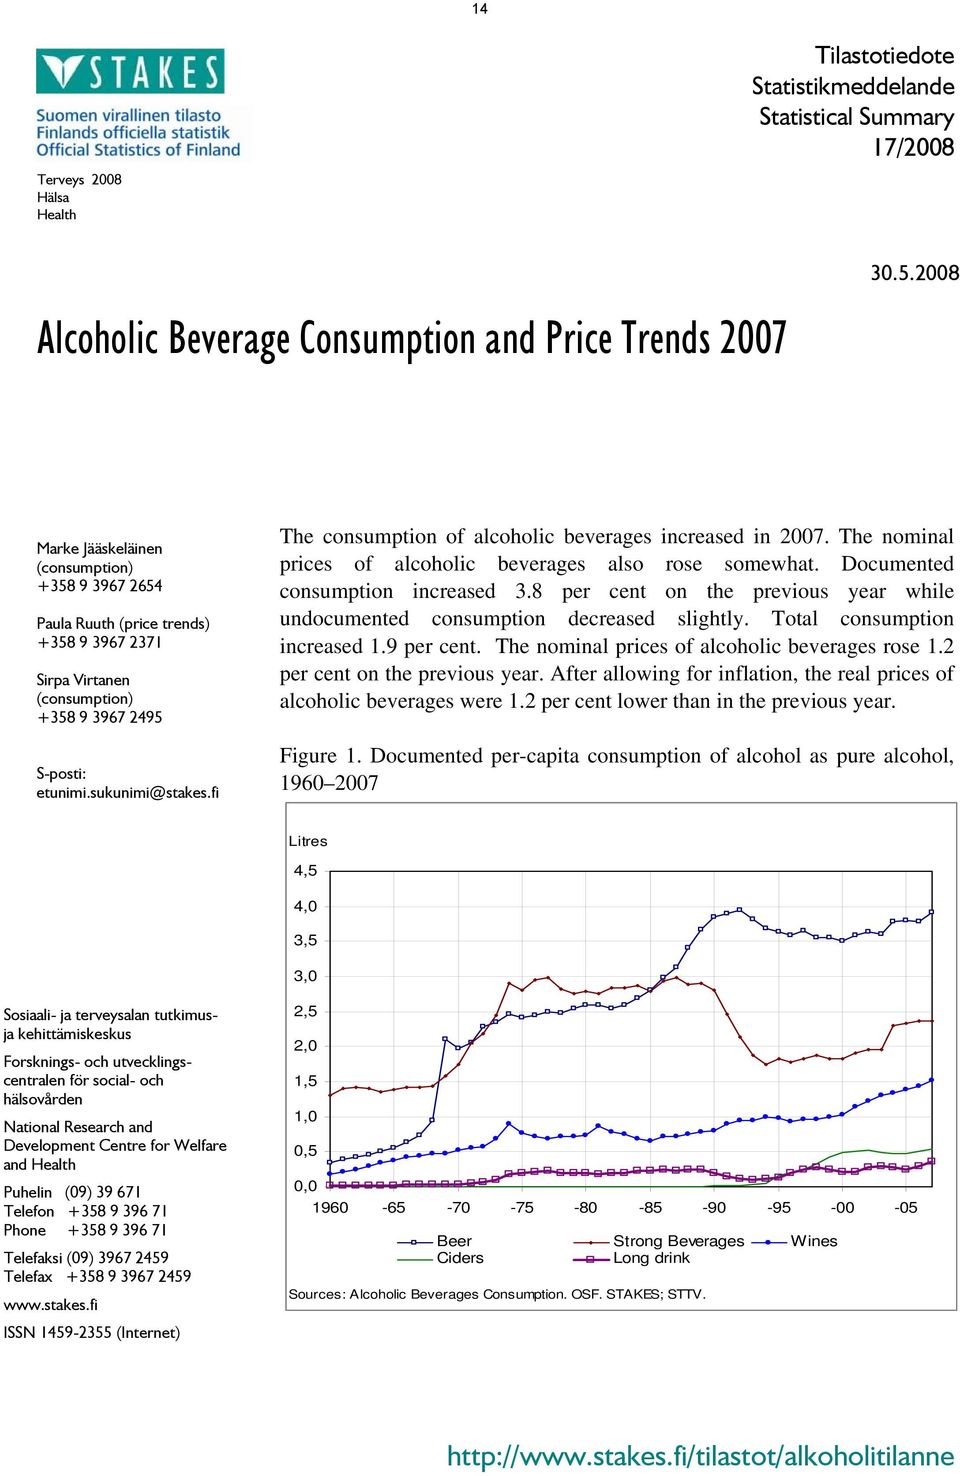 S-posti: etunimi.sukunimi@stakes.fi The consumption of alcoholic beverages increased in 2007. The nominal prices of alcoholic beverages also rose somewhat. Documented consumption increased 3.